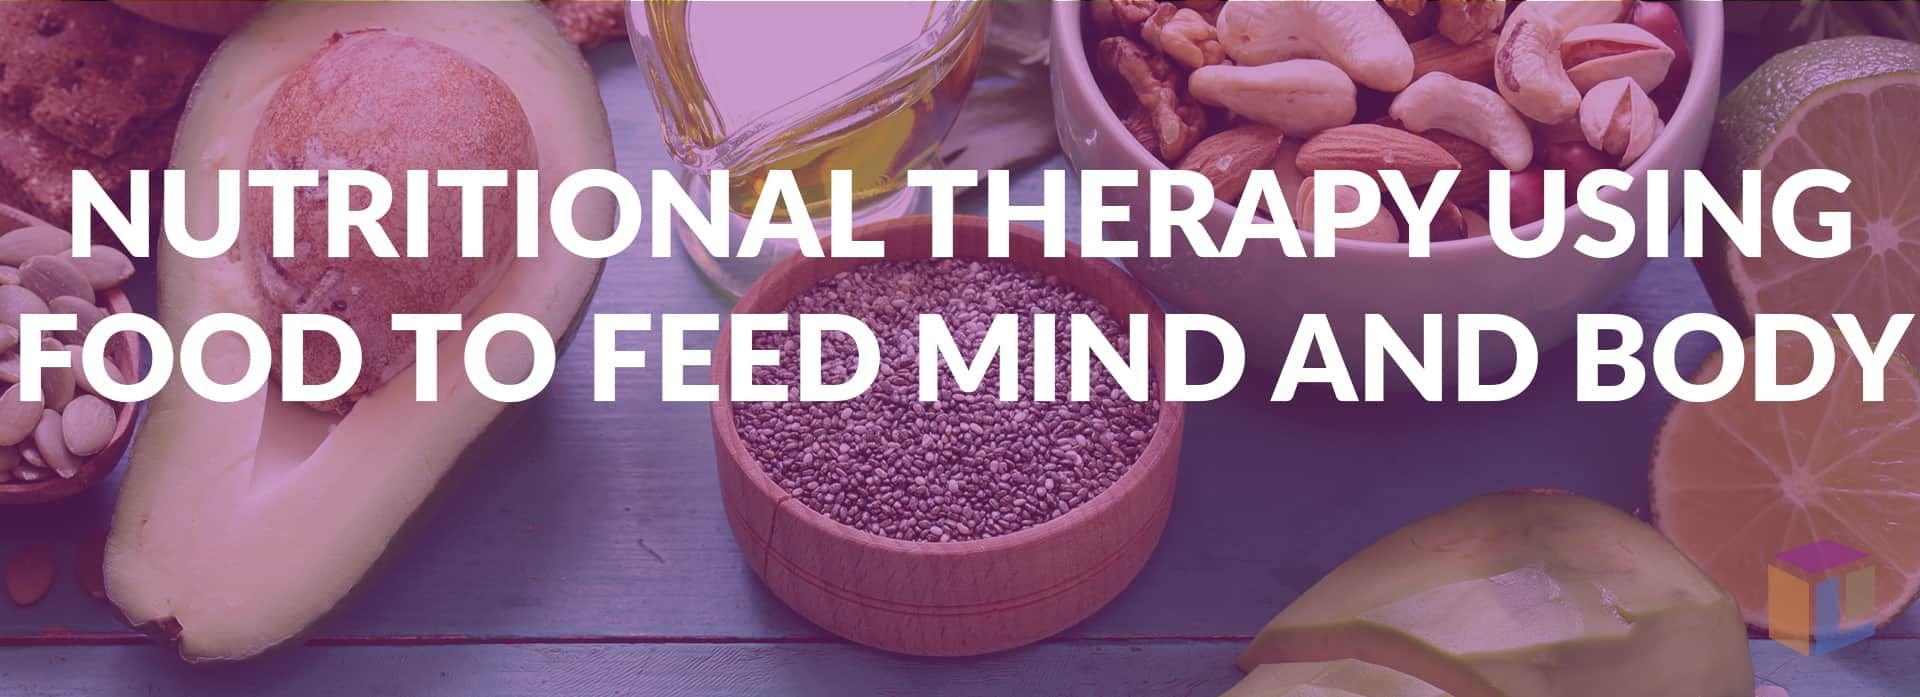 Nutritional Therapy Using Food To Feed Mind And Body Nutritional Therapy Using Food To Feed Mind And Body Nutritional Therapy Using Food To Feed Mind And Body Nutritional Therapy Using Food To Feed Mind And Body